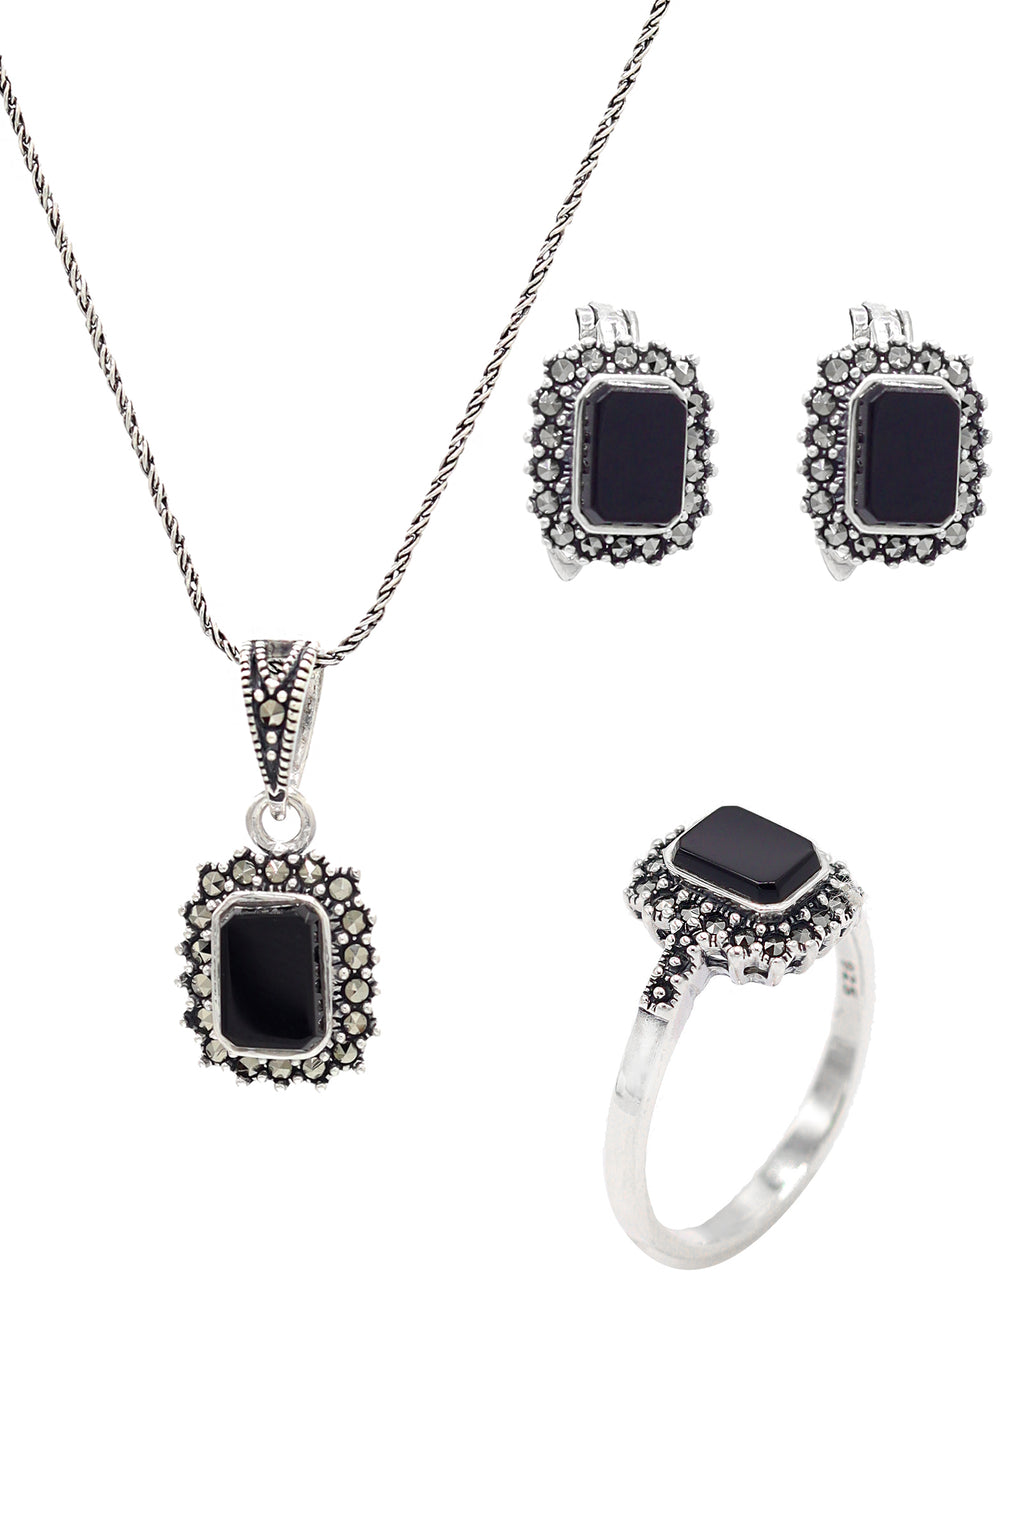 Rectangle Model Silver Triple Jewelry Set With Onyx (NG201021955)